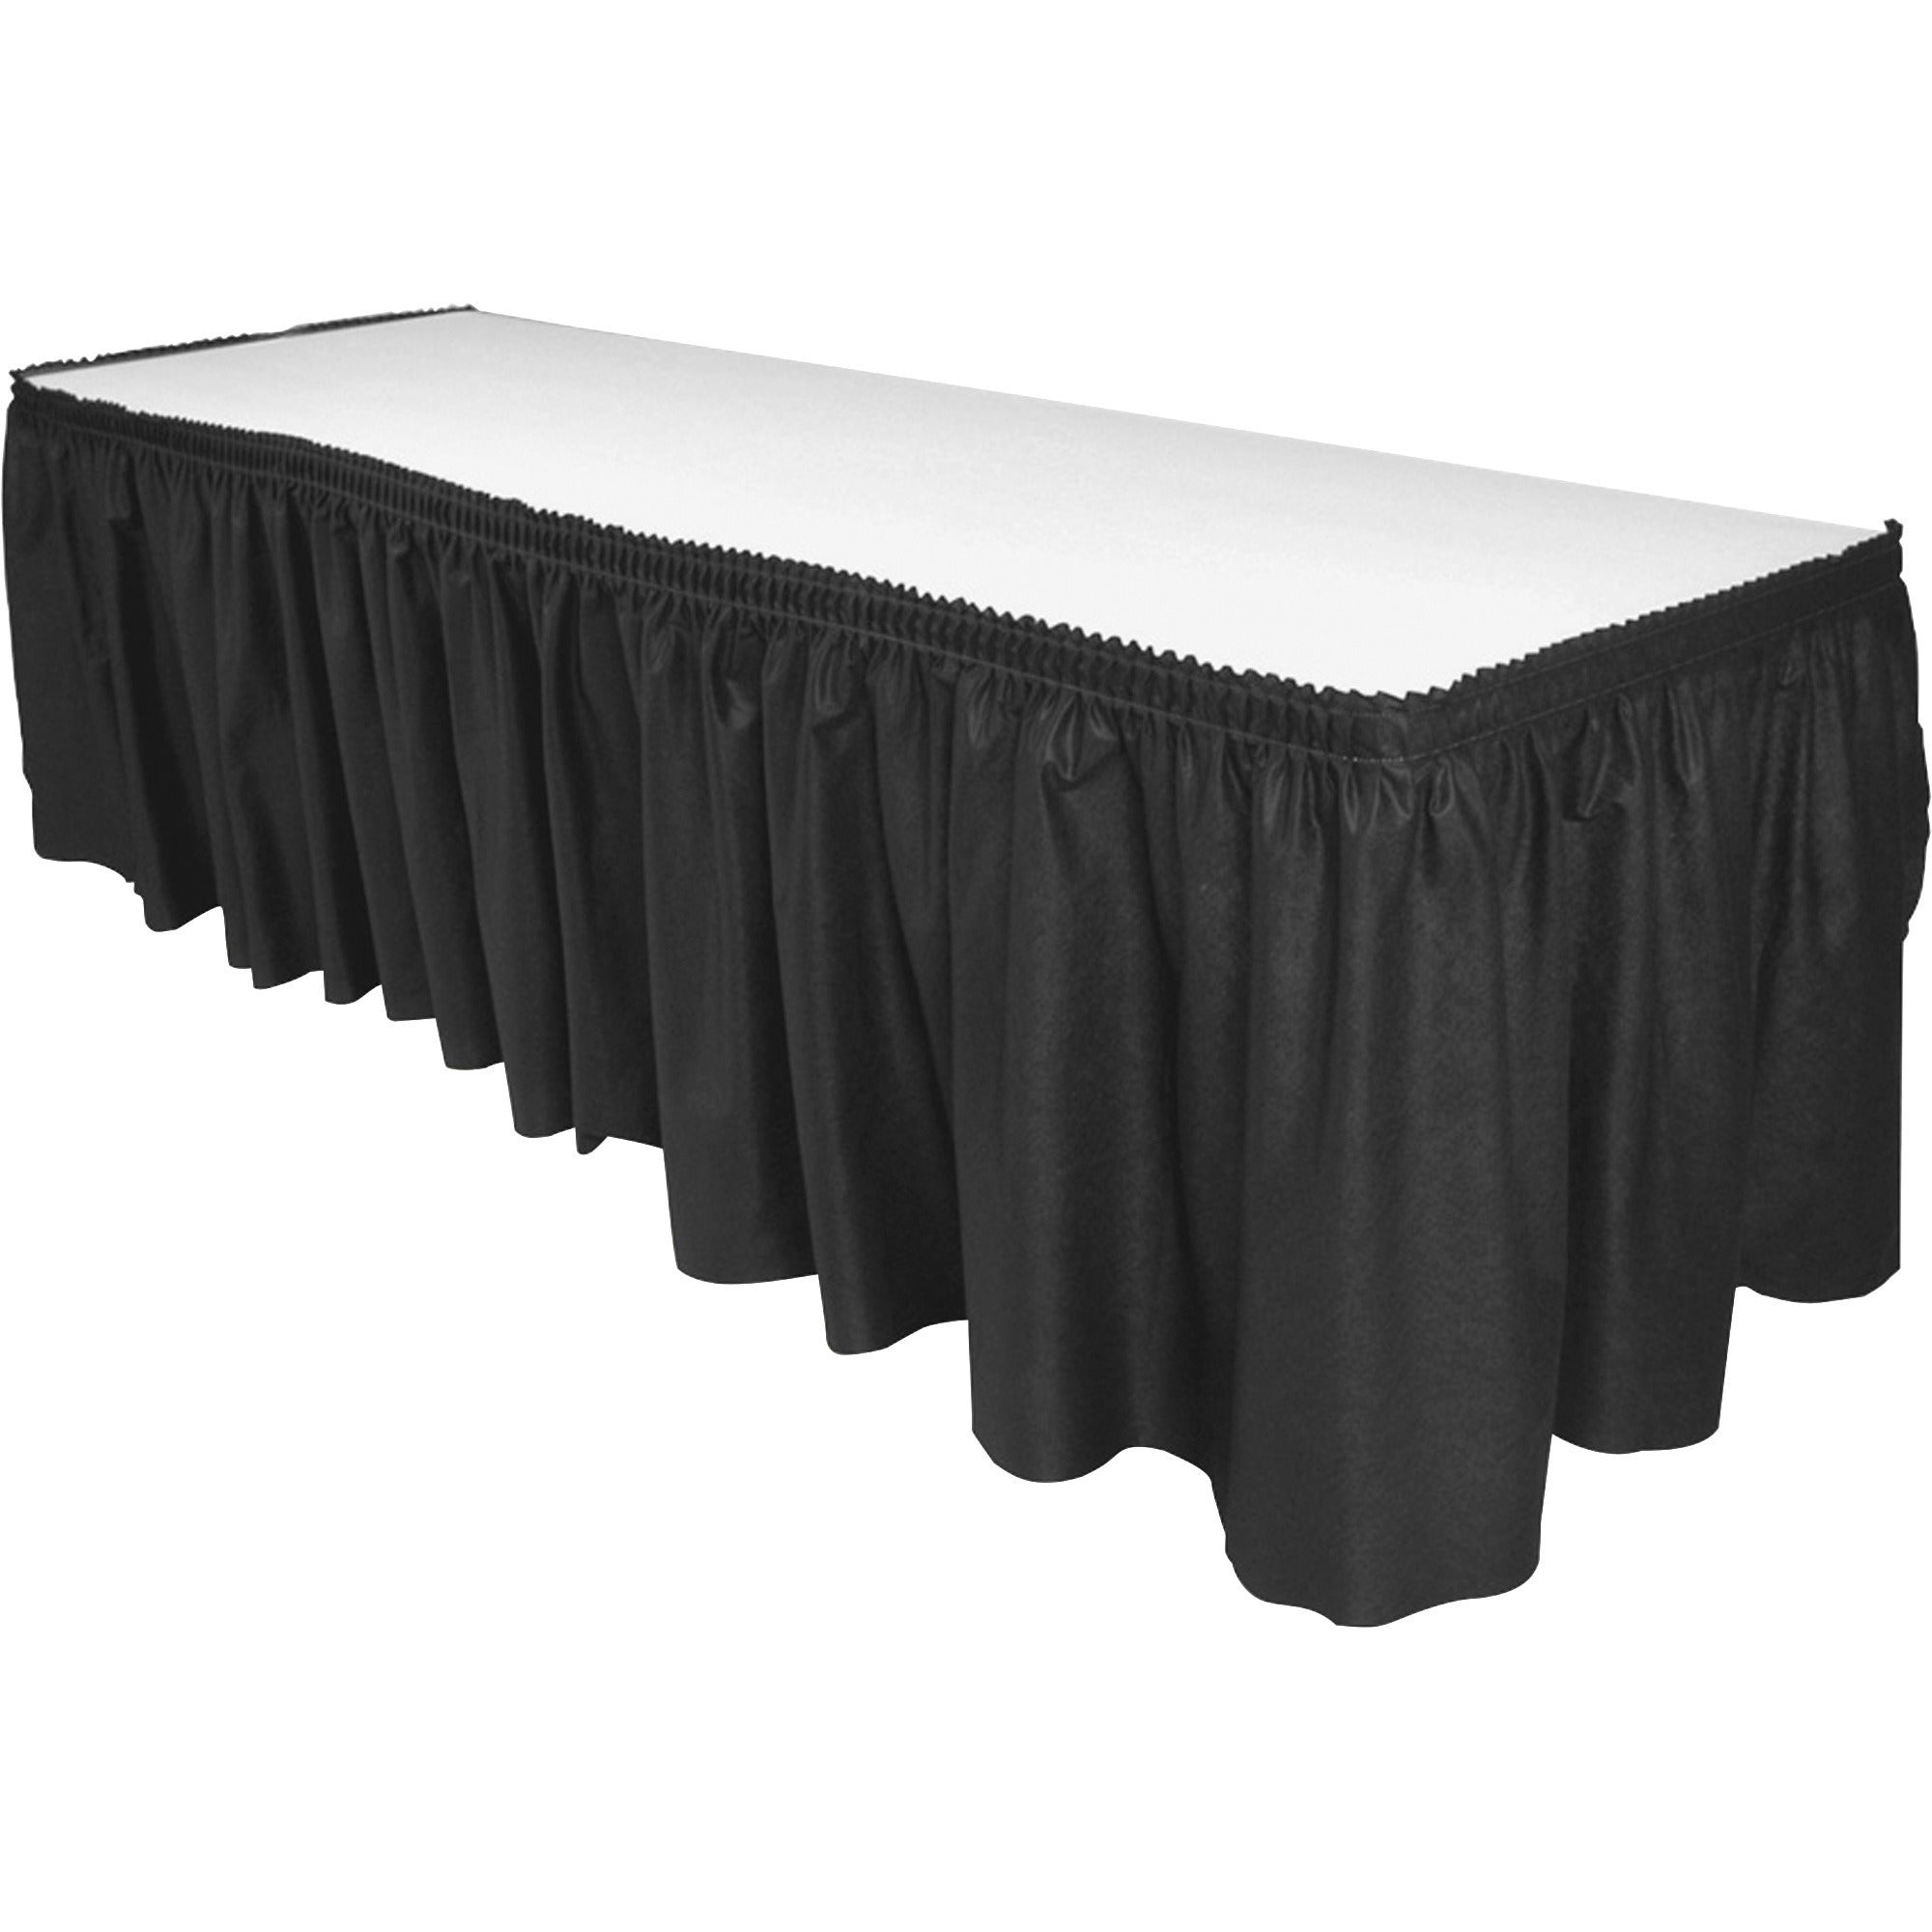 Genuine Joe Nonwoven Table Skirts - 14 ft Length x 29" Width - Adhesive Backing - Polyester - Black - 1 Each - 